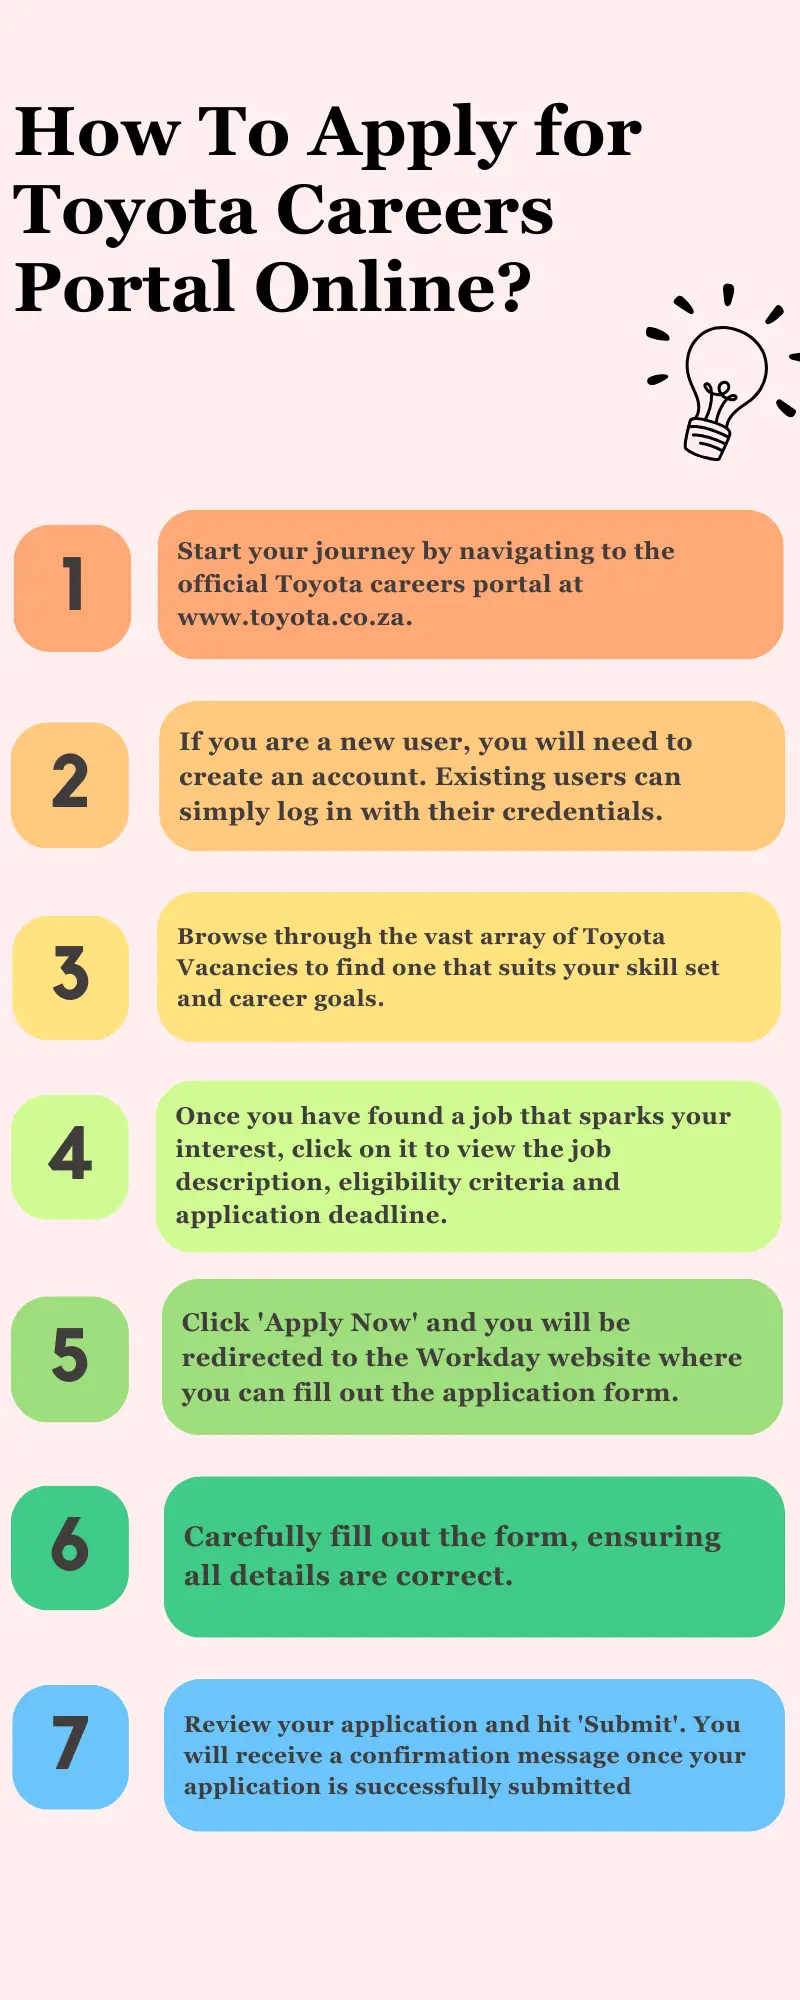 How To Apply for Toyota Careers Portal Online?